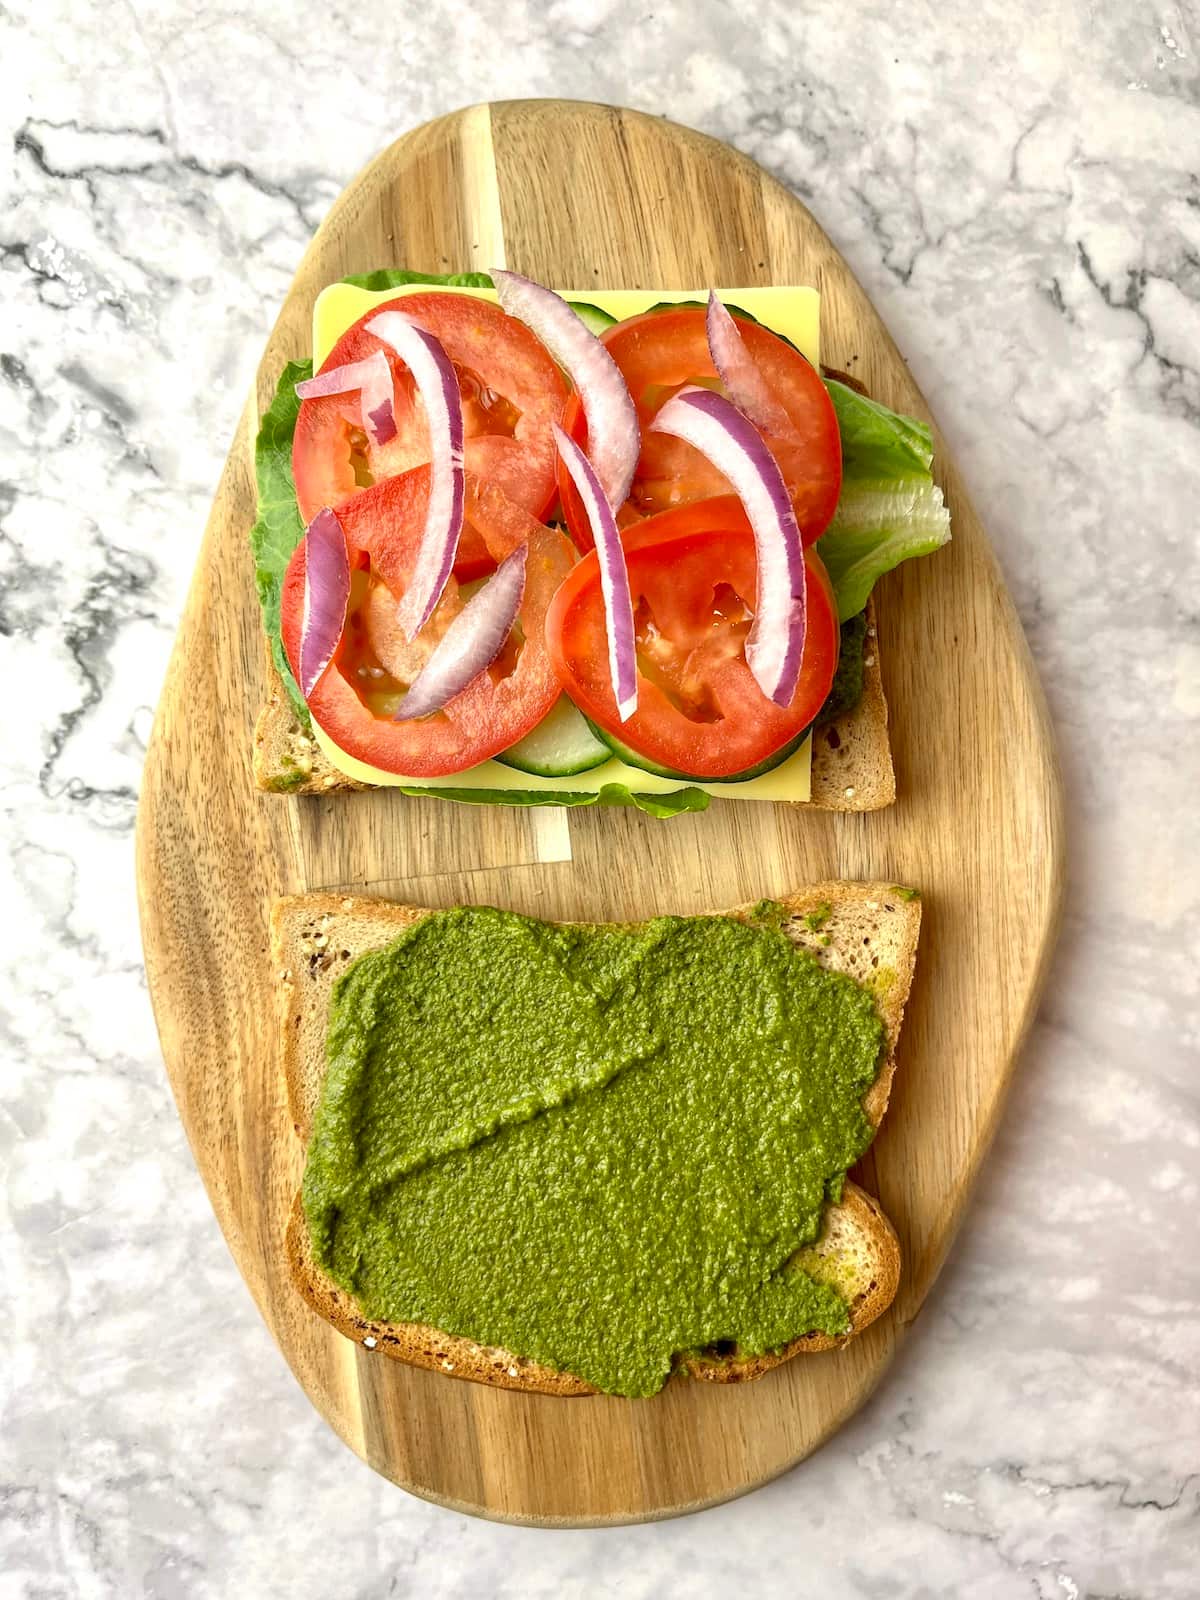 Two slices of bread, one with pesto and one with veggies including tomato and onion slices.